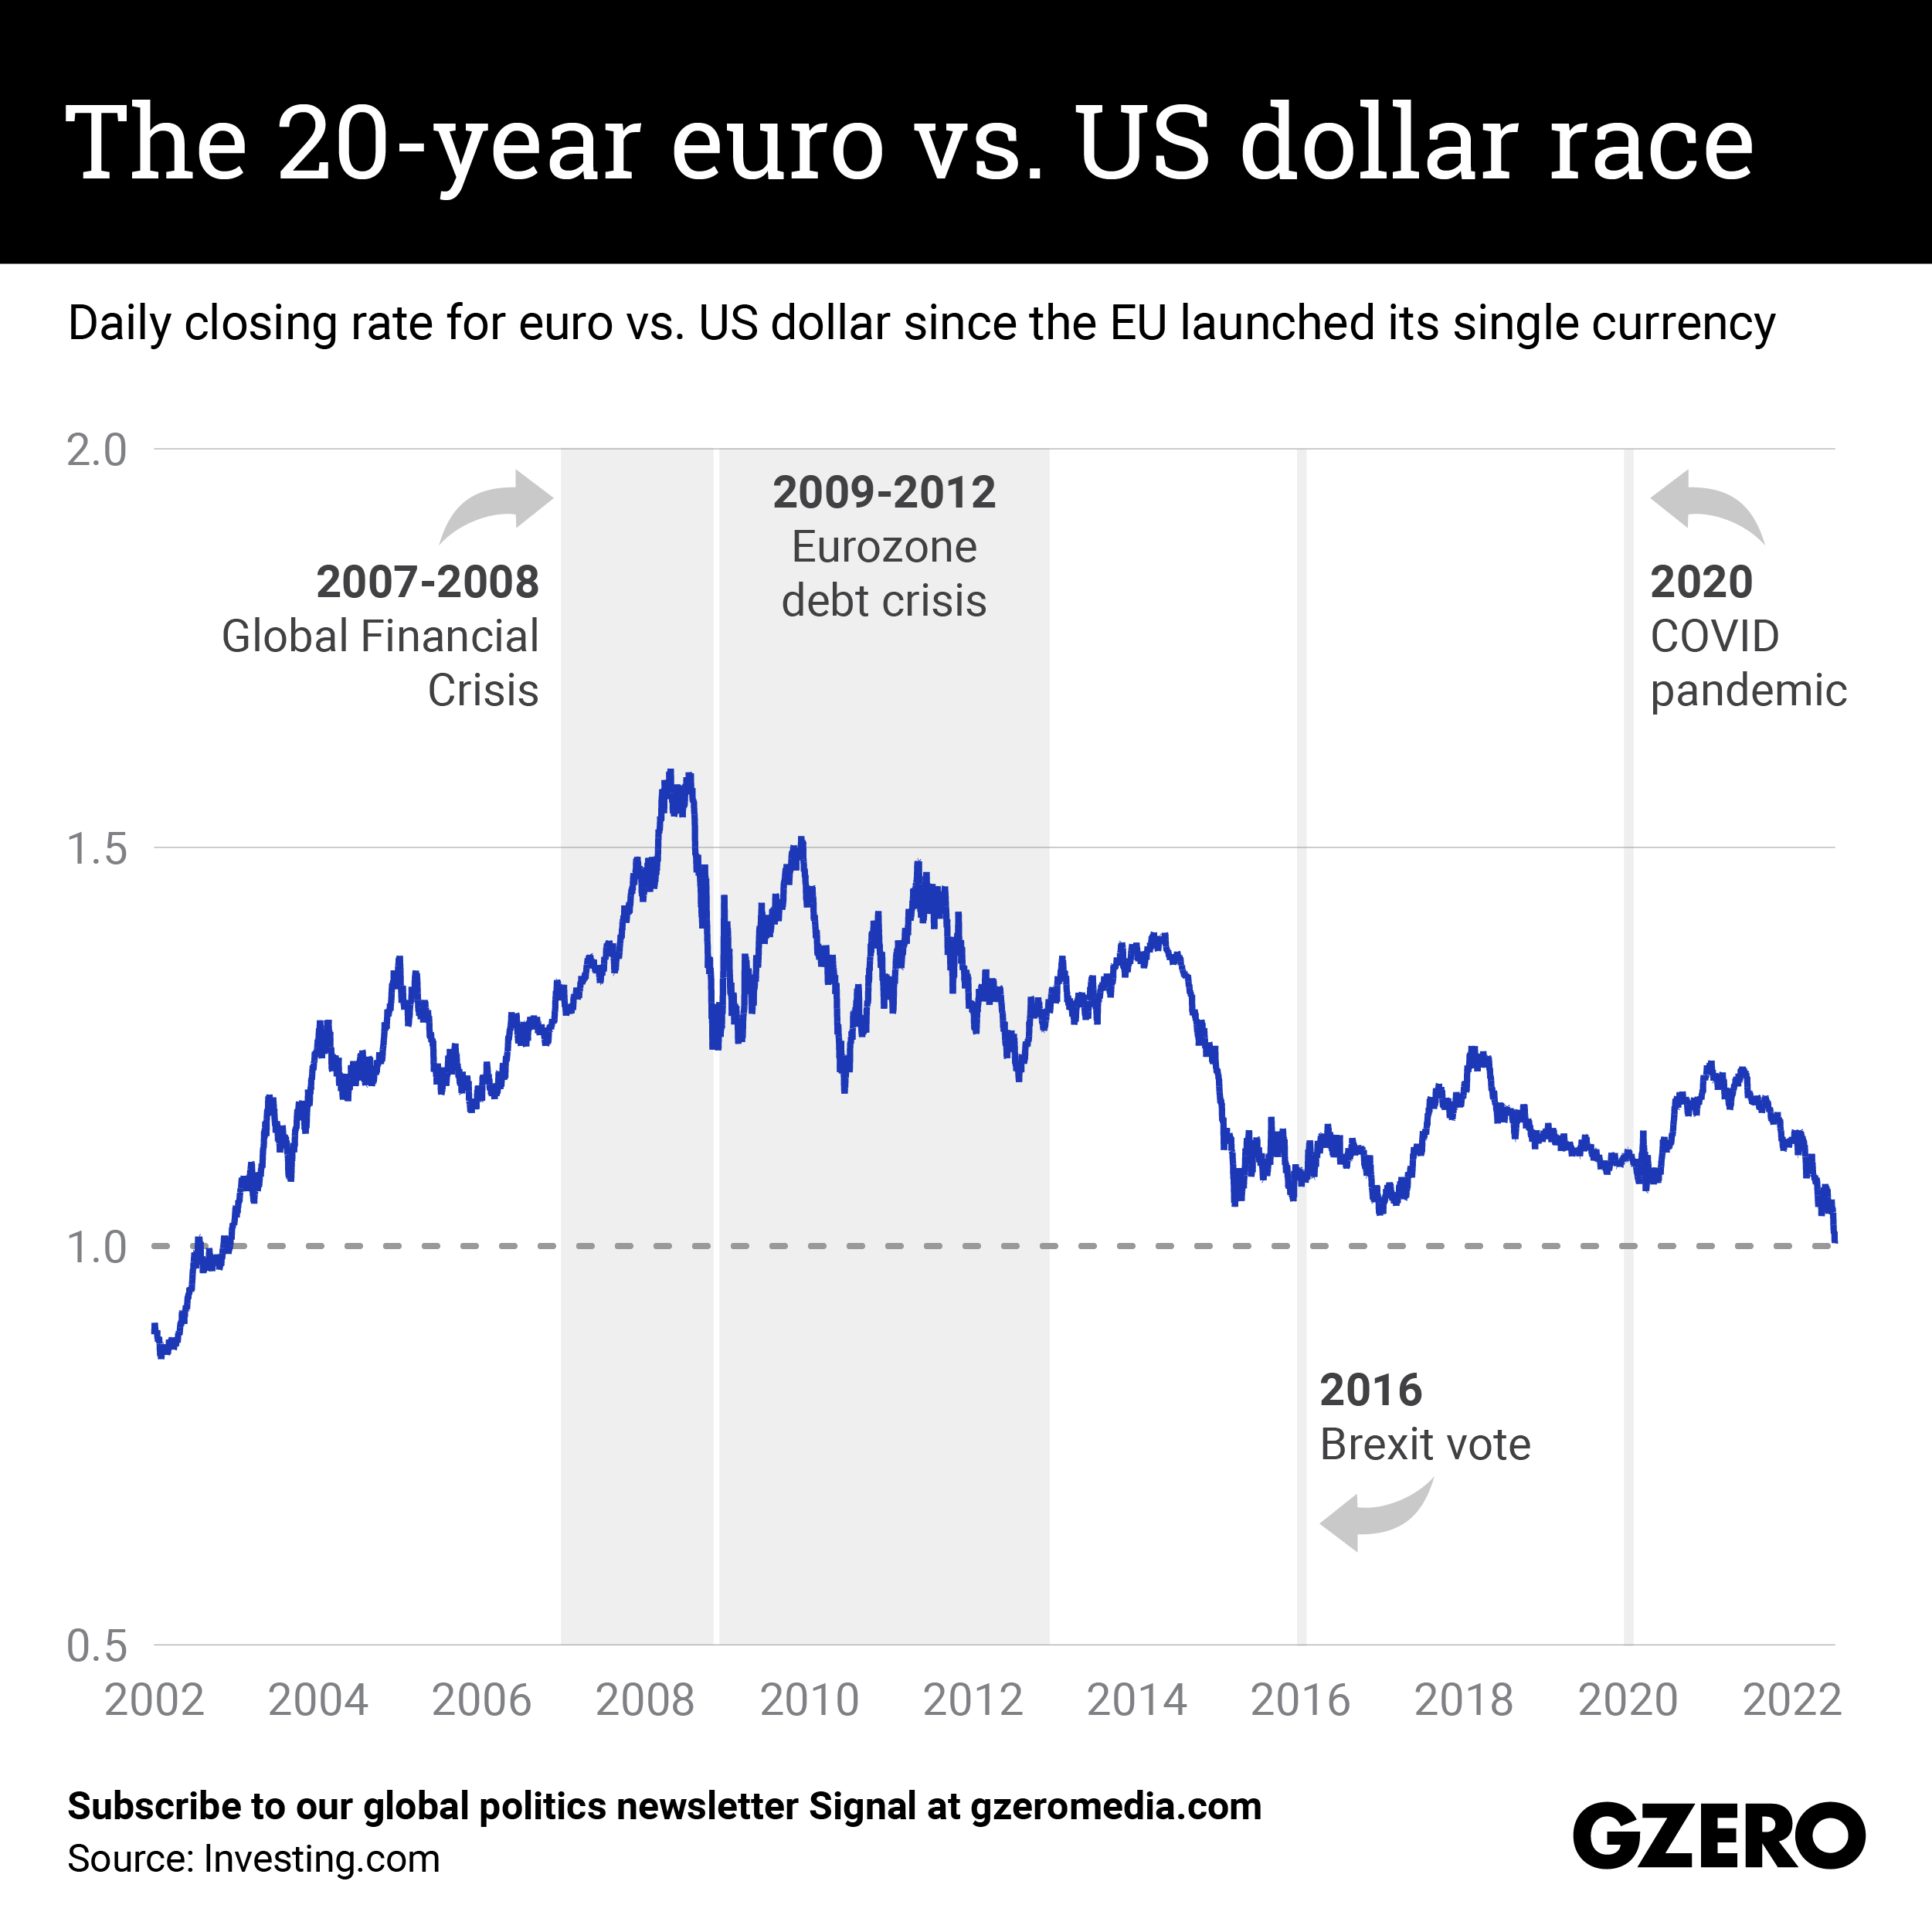 The Graphic Truth: The 20-year euro vs. US dollar race